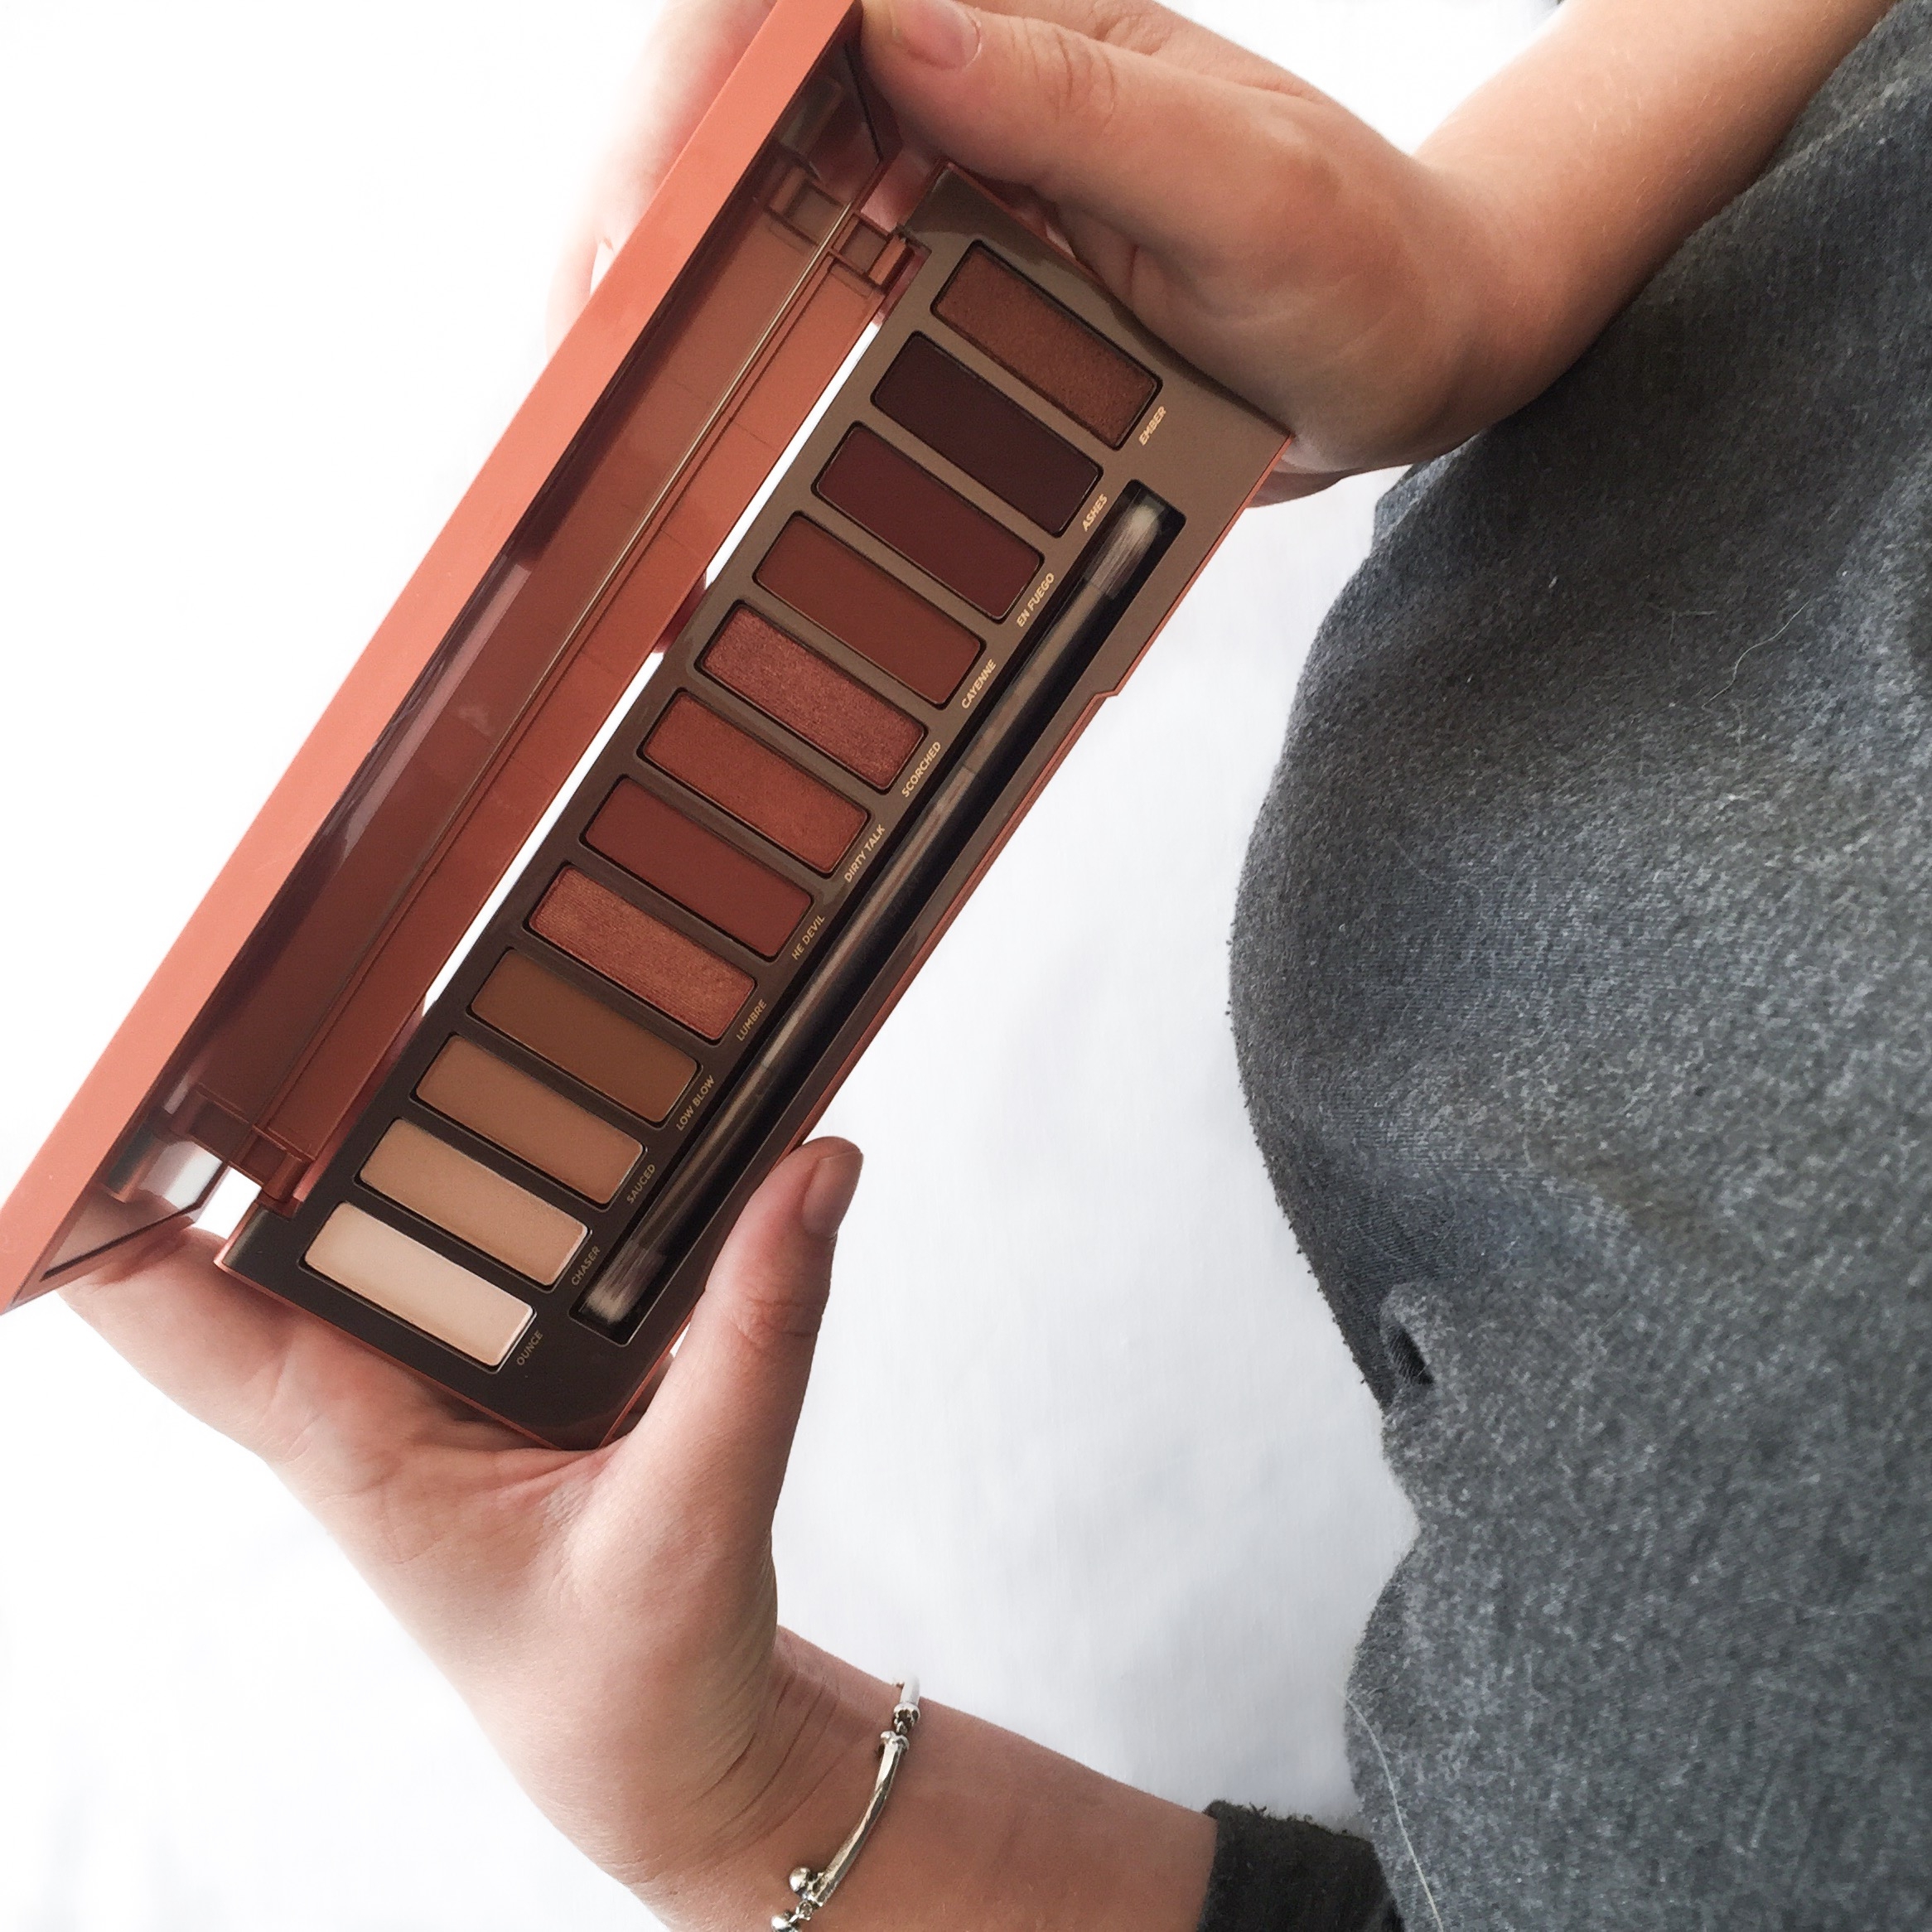 Urban Decay Naked Heat Palette | Review, Swatches + 3 Looks